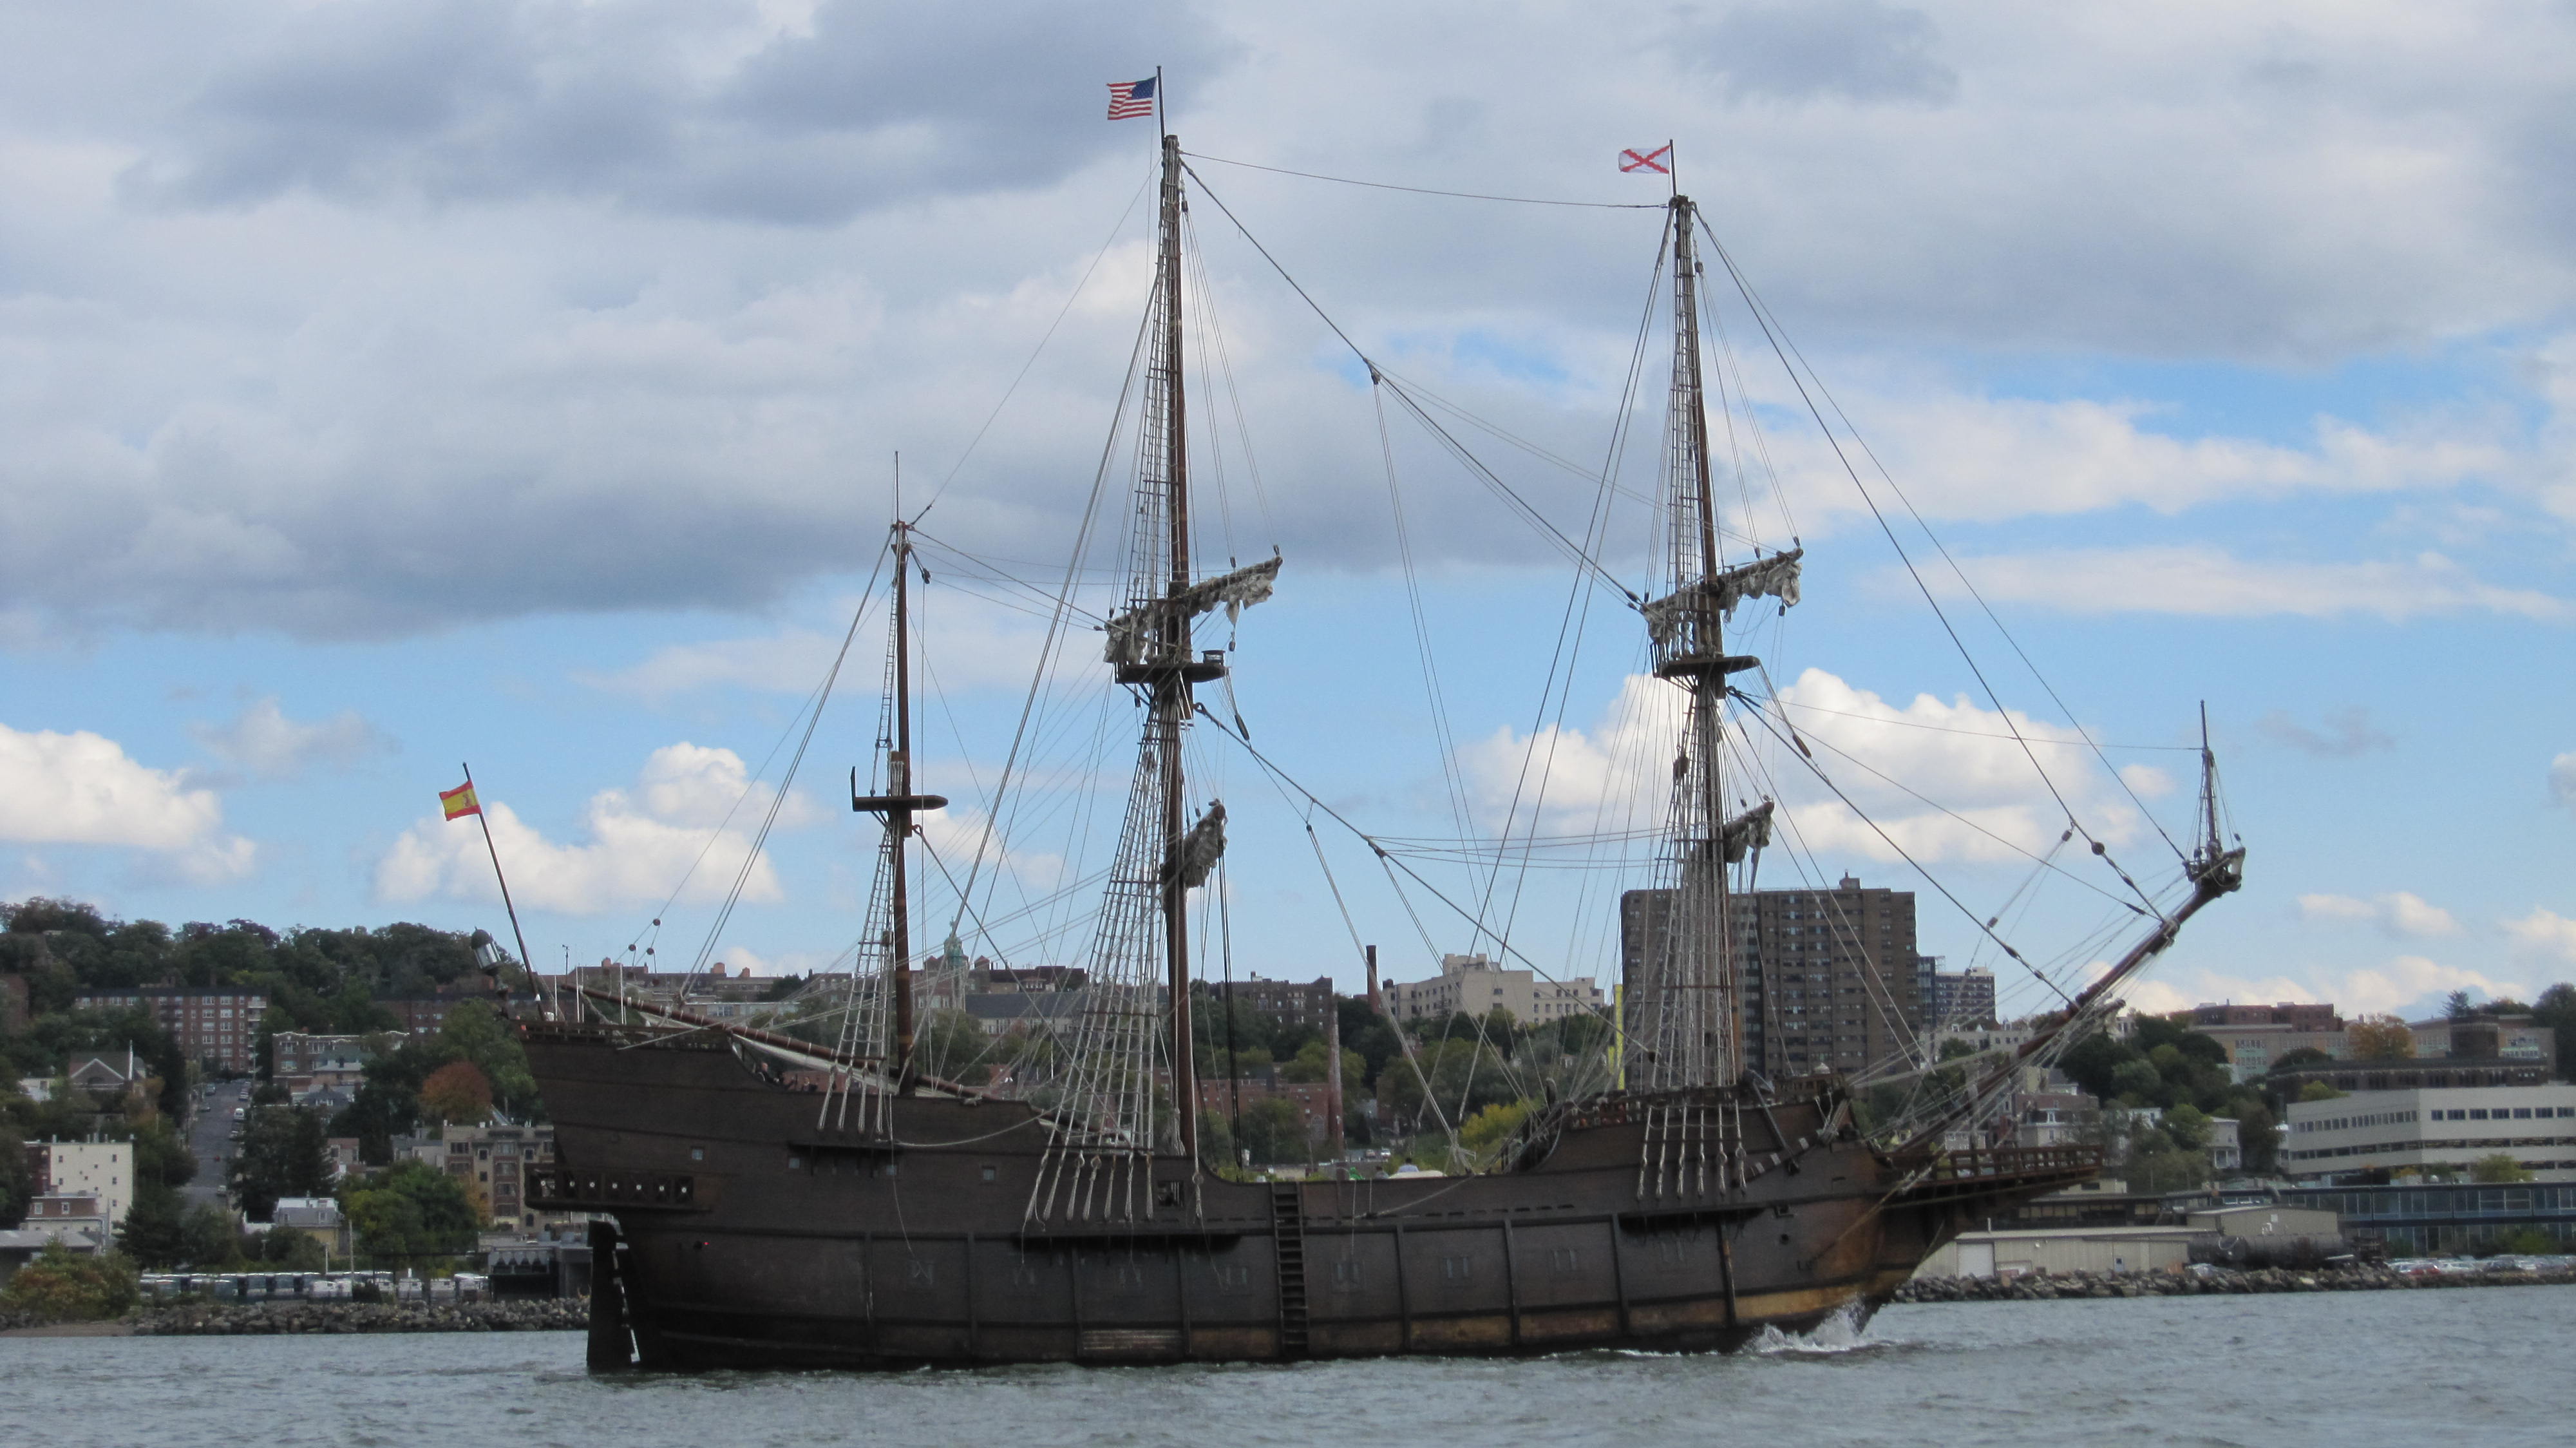 Pirate Ship on the Hudson